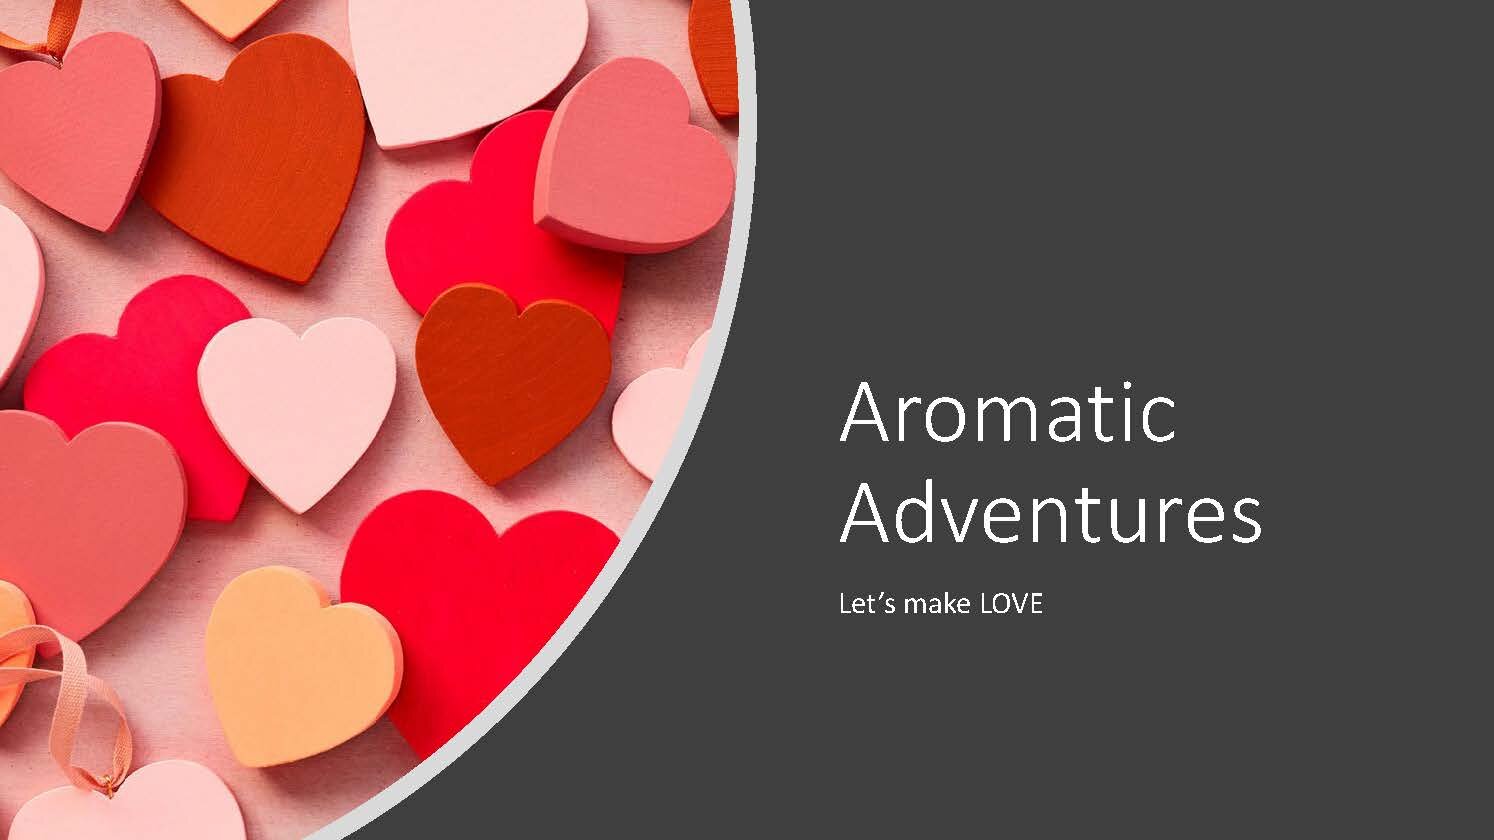 Aromatic Adventures Let's make Love_Page_1.jpg